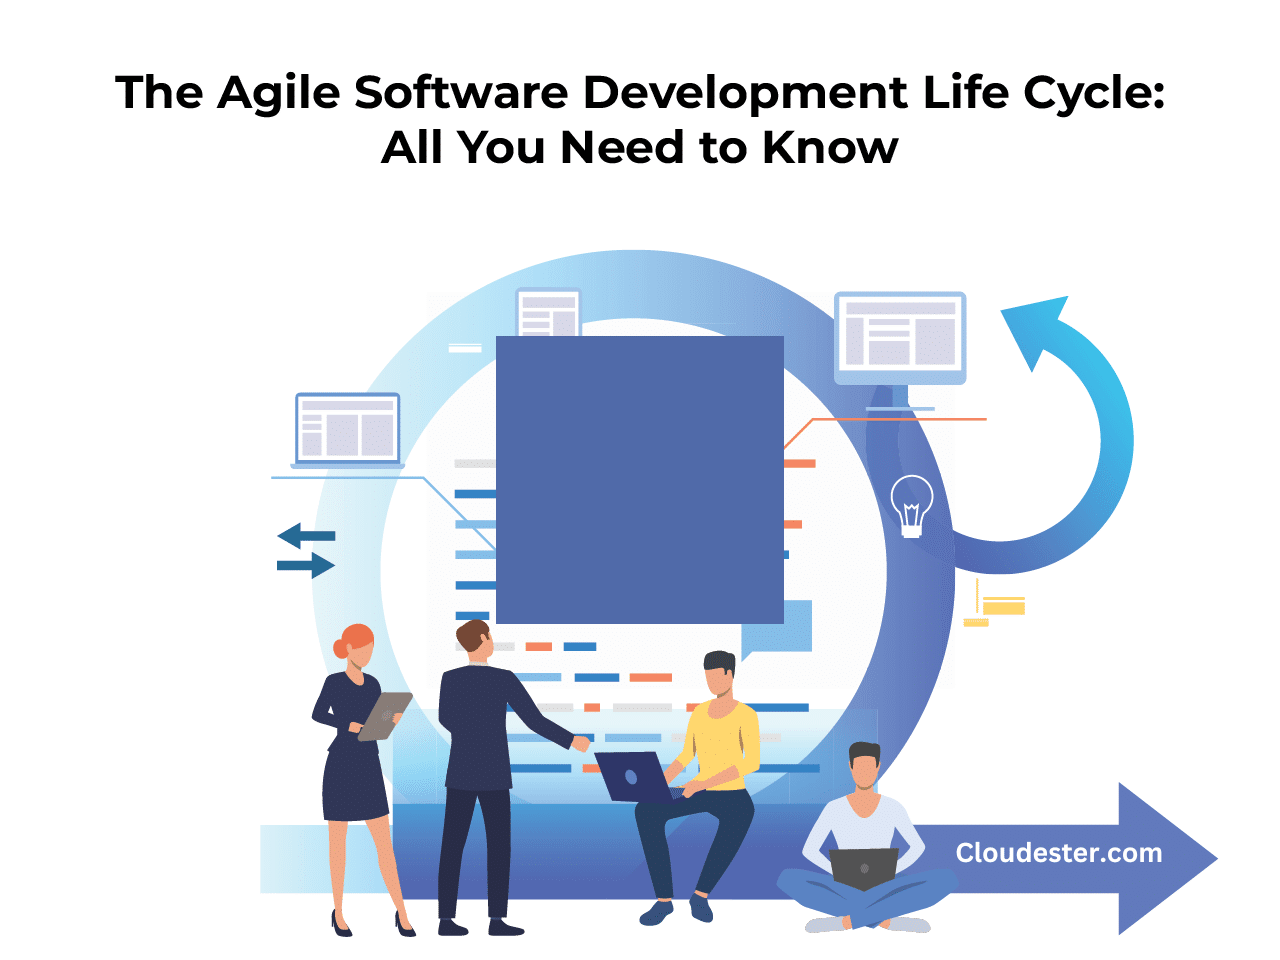 The Stages of the Agile Software Development Life Cycle